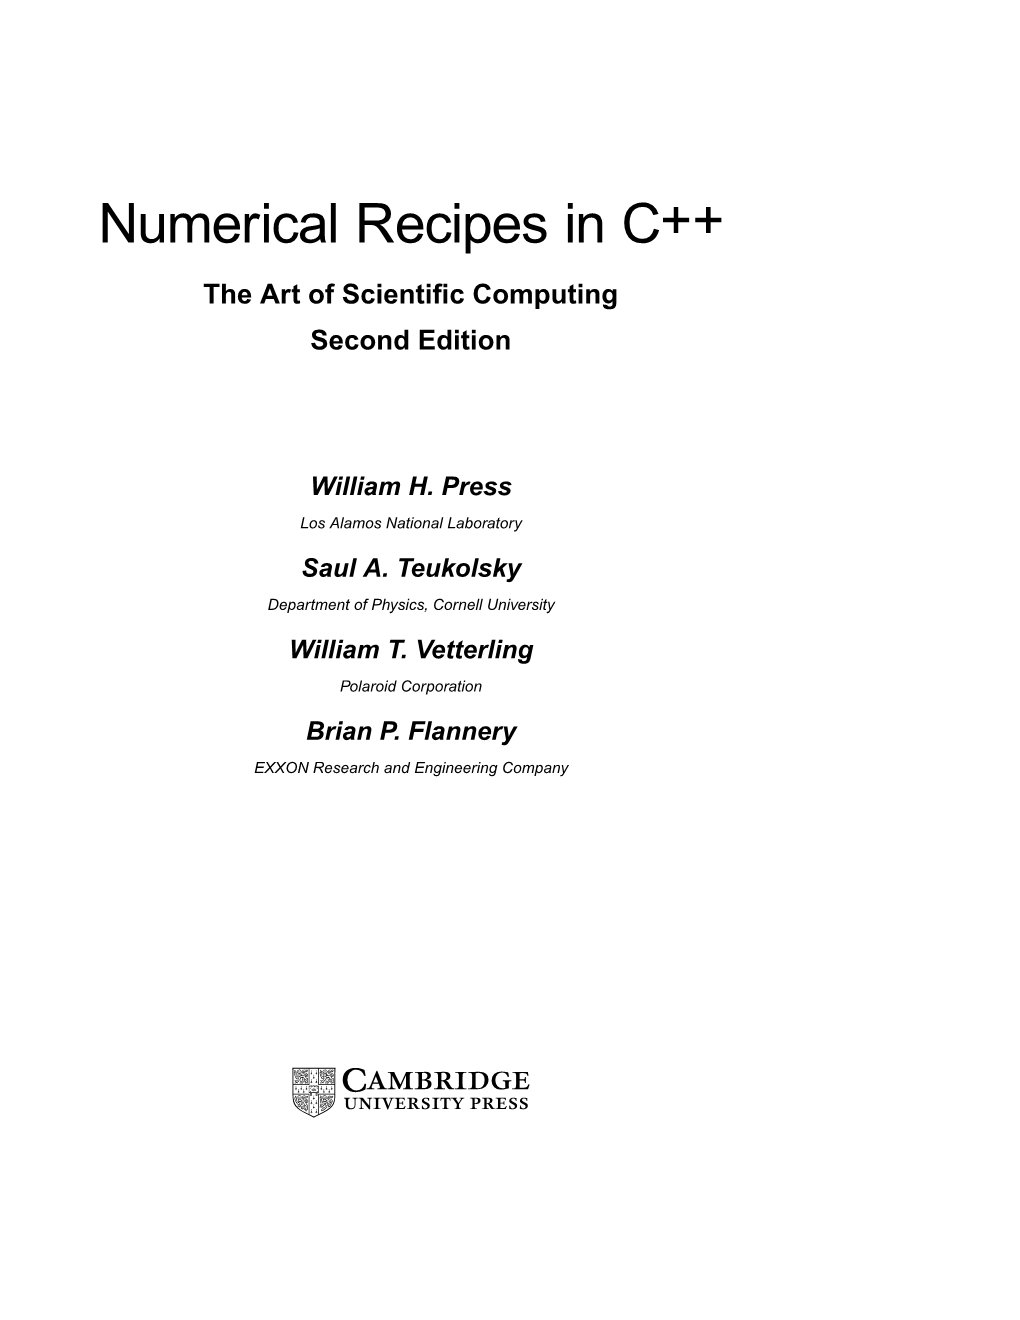 Numerical Recipes in C++ the Art of Scientiﬁc Computing Second Edition